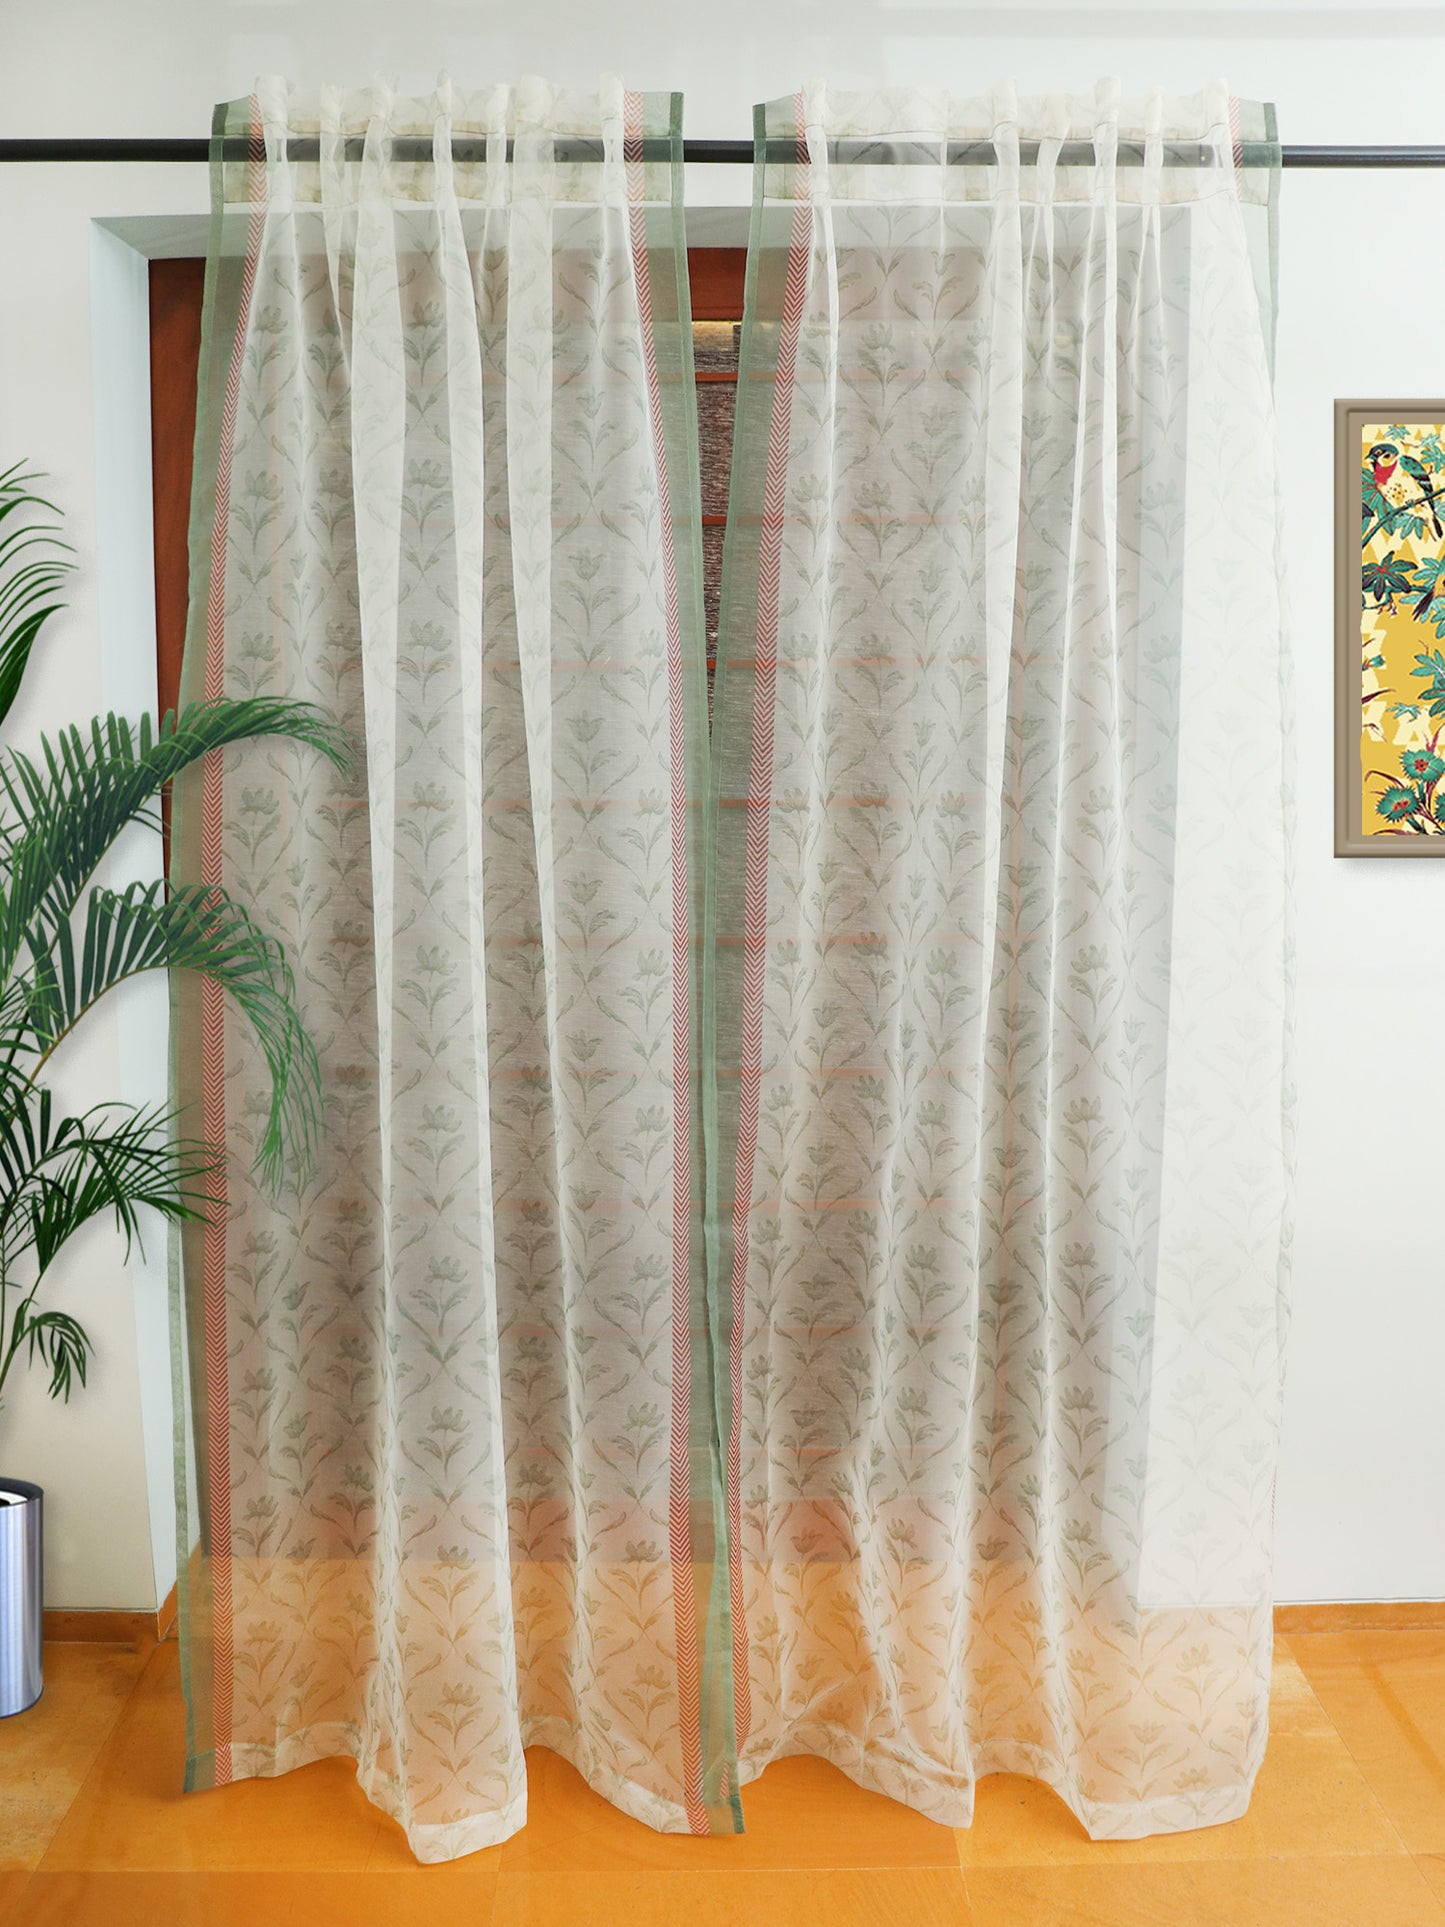 Transparent Organza Sheer Curtain for Door | Bedroom and Living Room | Soft and Light Weight | Floral Printed with Hidden Loop in Multicolor - 50x80 inches (7feet Long)